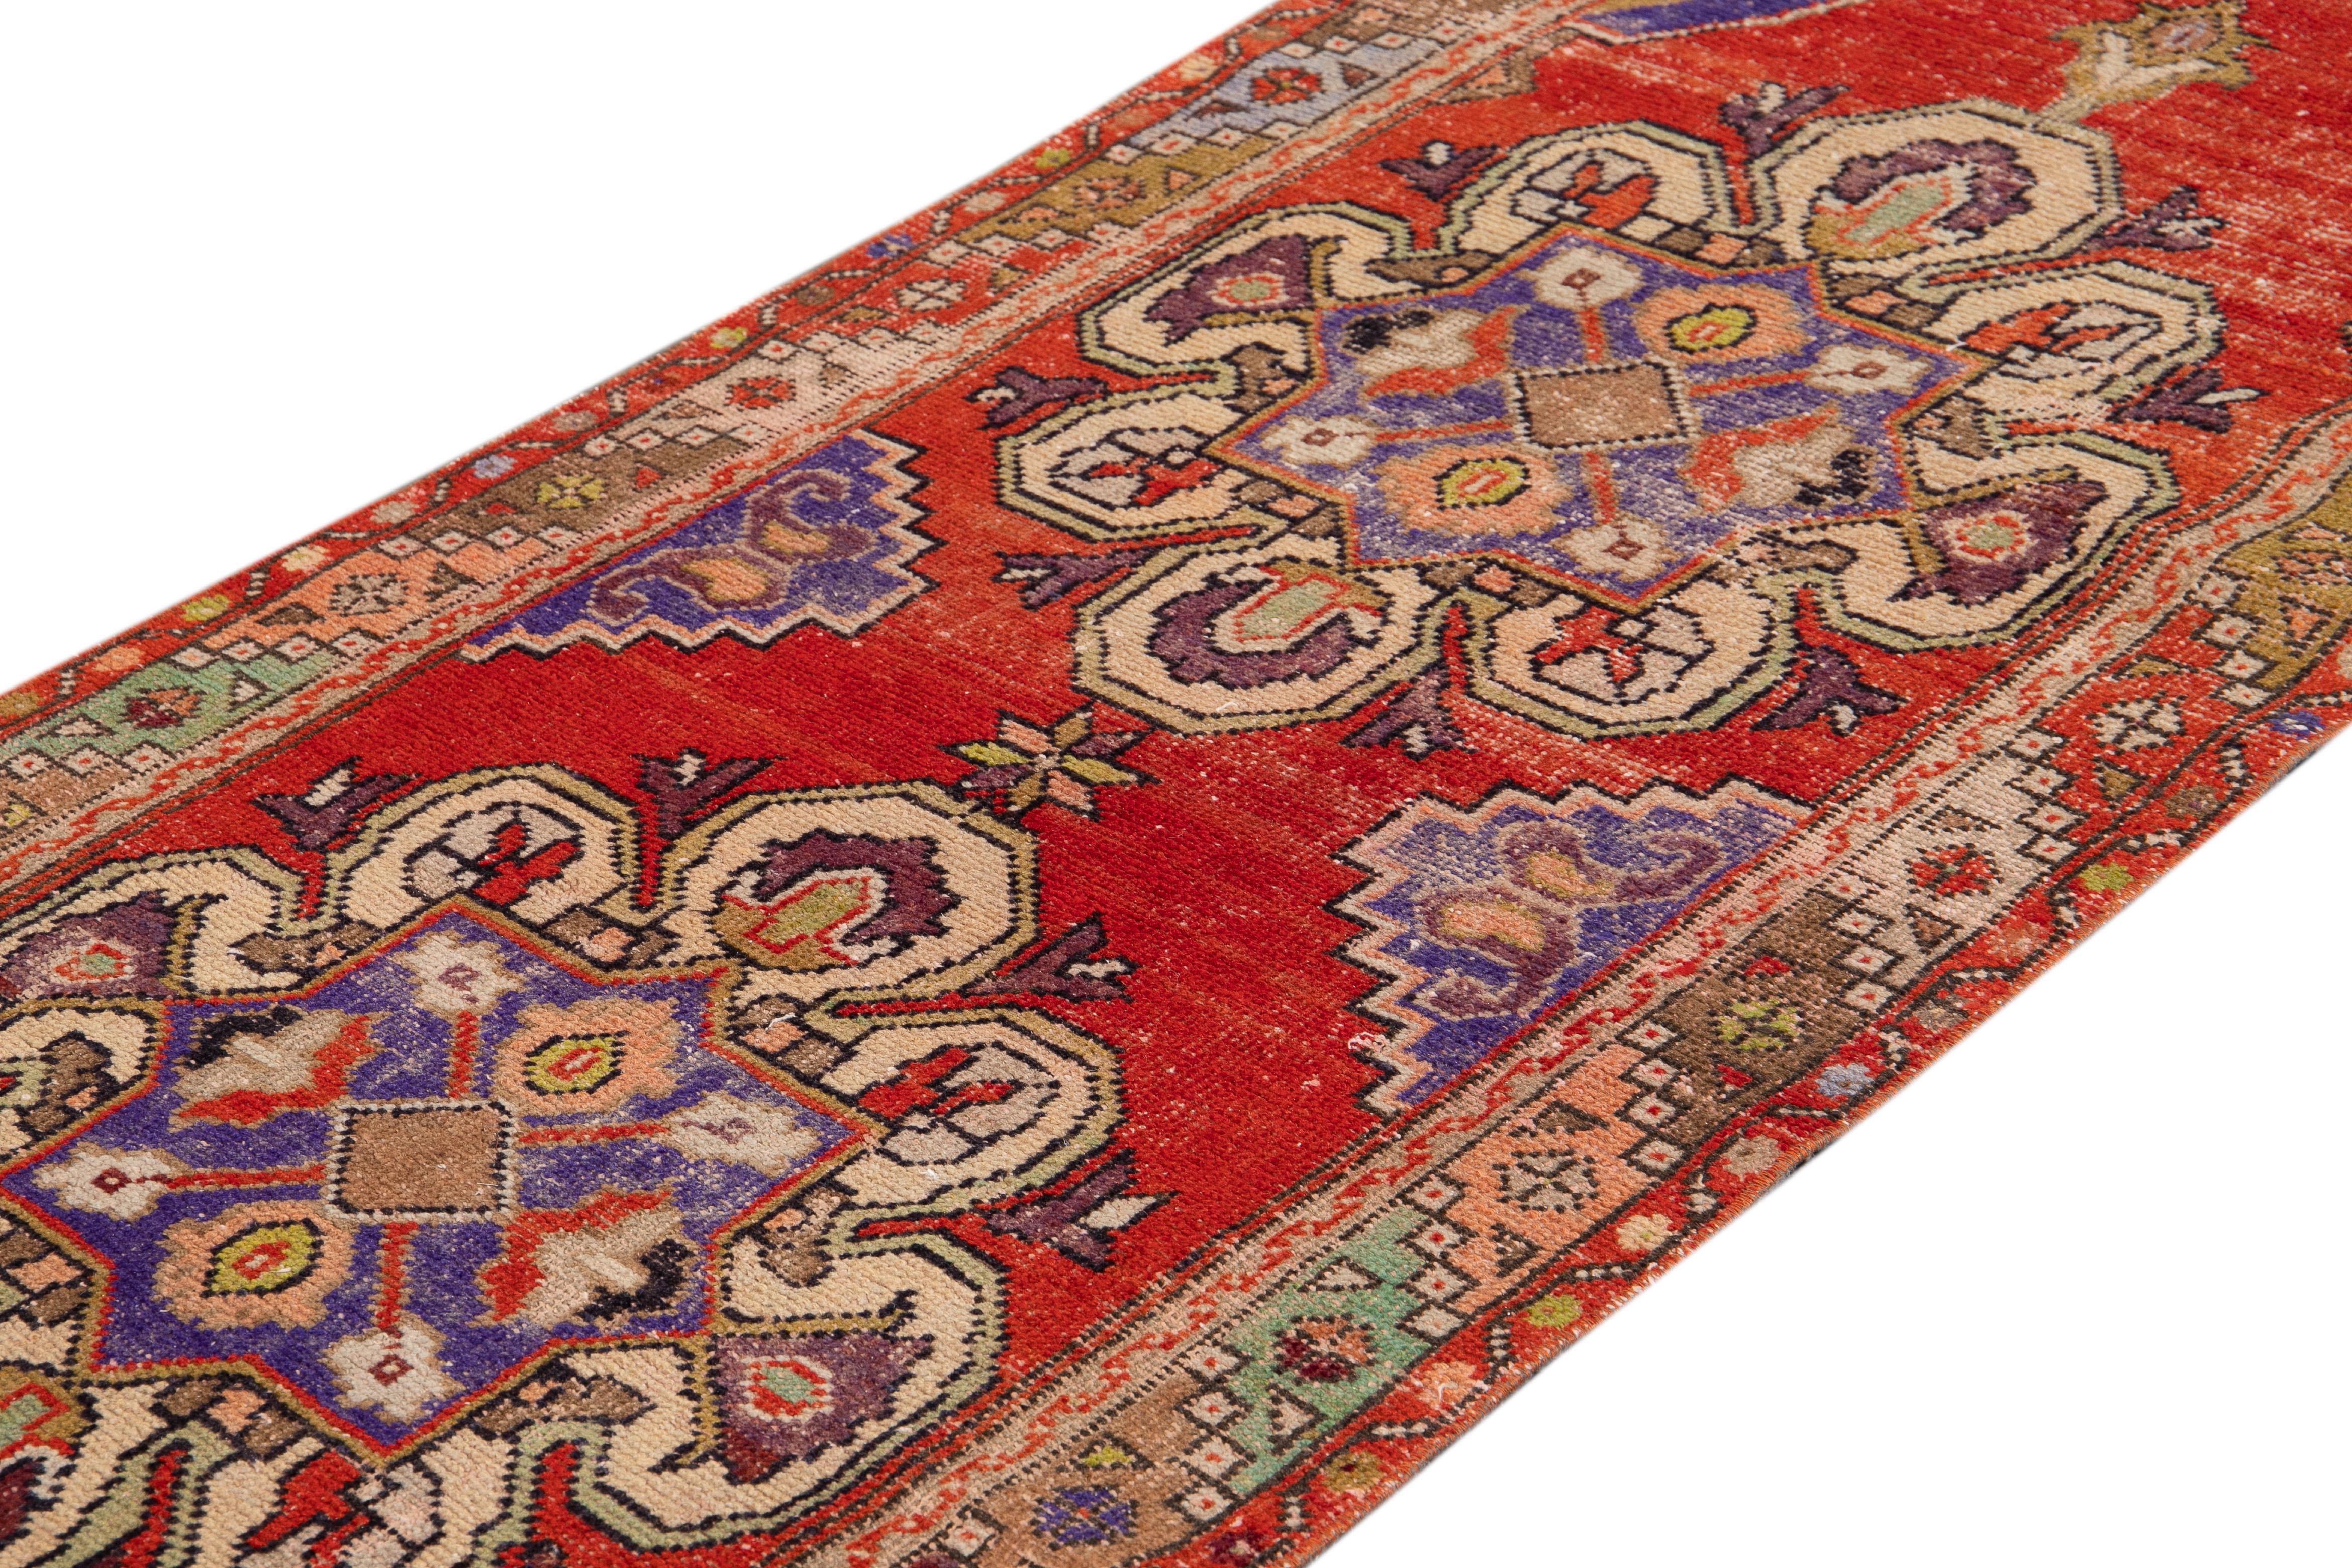 Beautiful antique runner rug, with a red field, ivory and purple accents in Classic multi medallion design.

This rug measures 3' 2